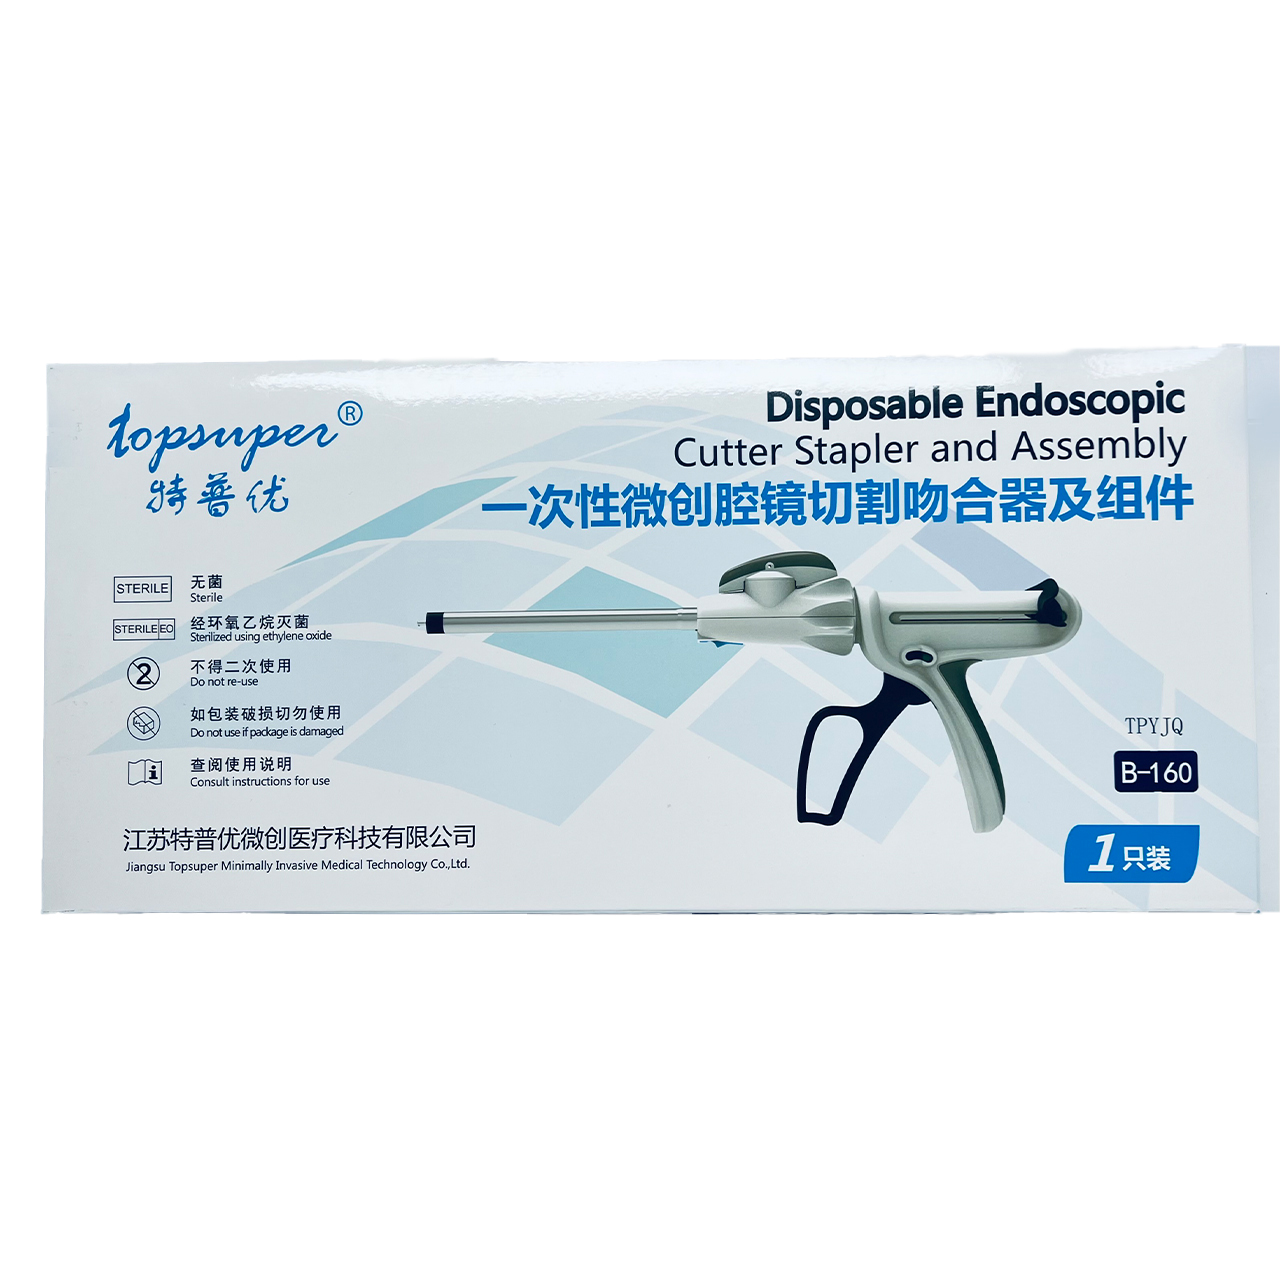 Disposable Endoscopic Cutter Stapler and Assembly